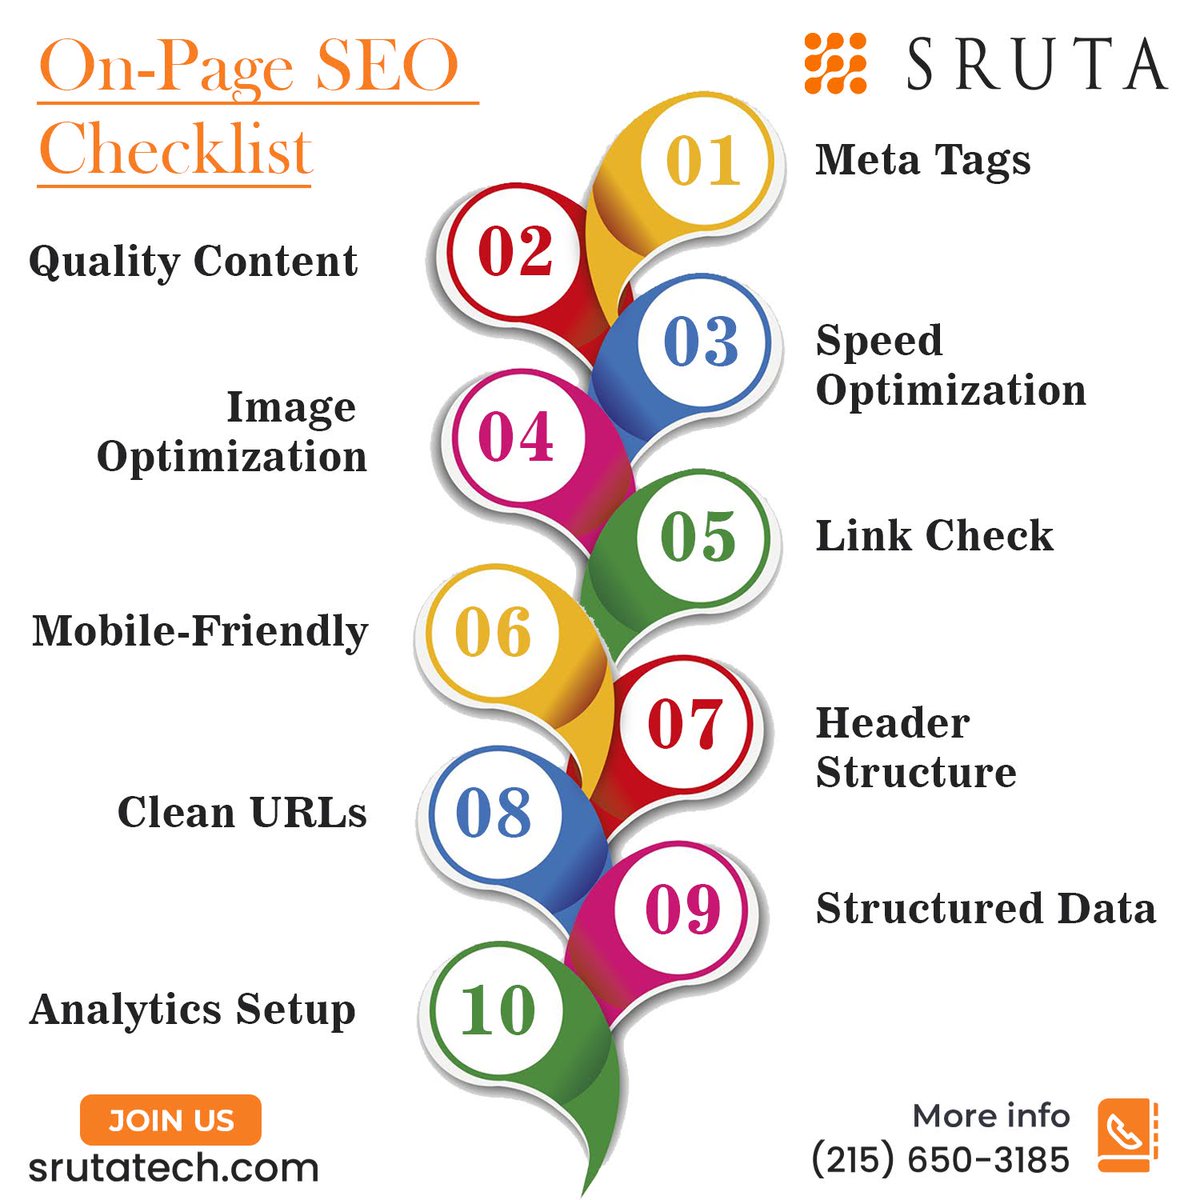 Simple steps, big results! Follow this checklist to boost your website's visibility and conquer the search engine rankings! 🚀

Know more at srutatech.com/?utm_source=Tw…

#SEOBoost #WebsiteVisibility #contentcreator #contentcreation #ContentMarketing #contentmarketing